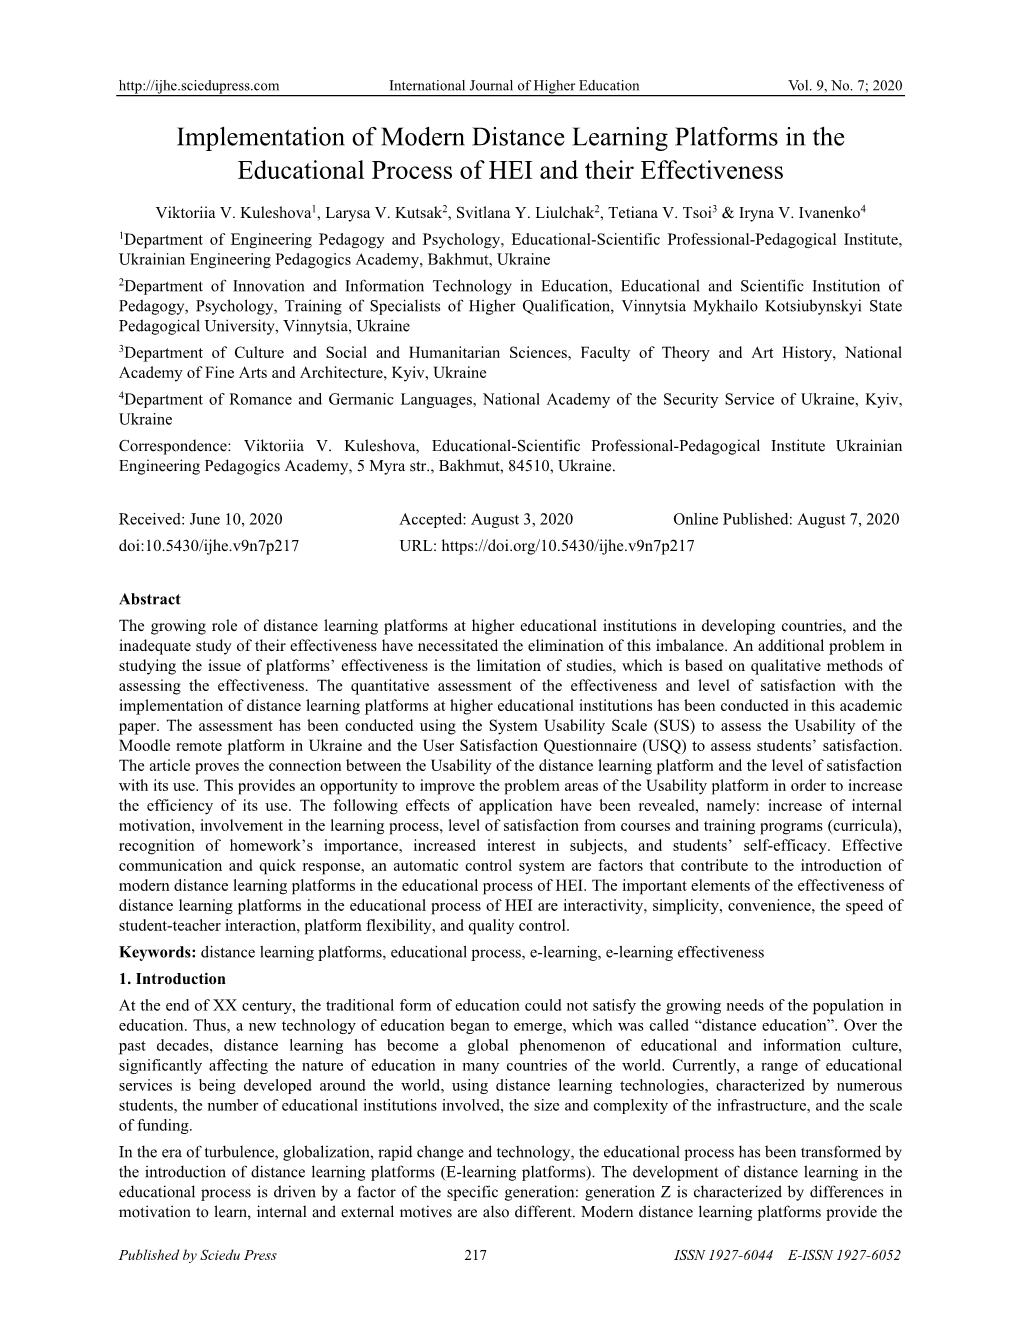 Implementation of Modern Distance Learning Platforms in the Educational Process of HEI and Their Effectiveness